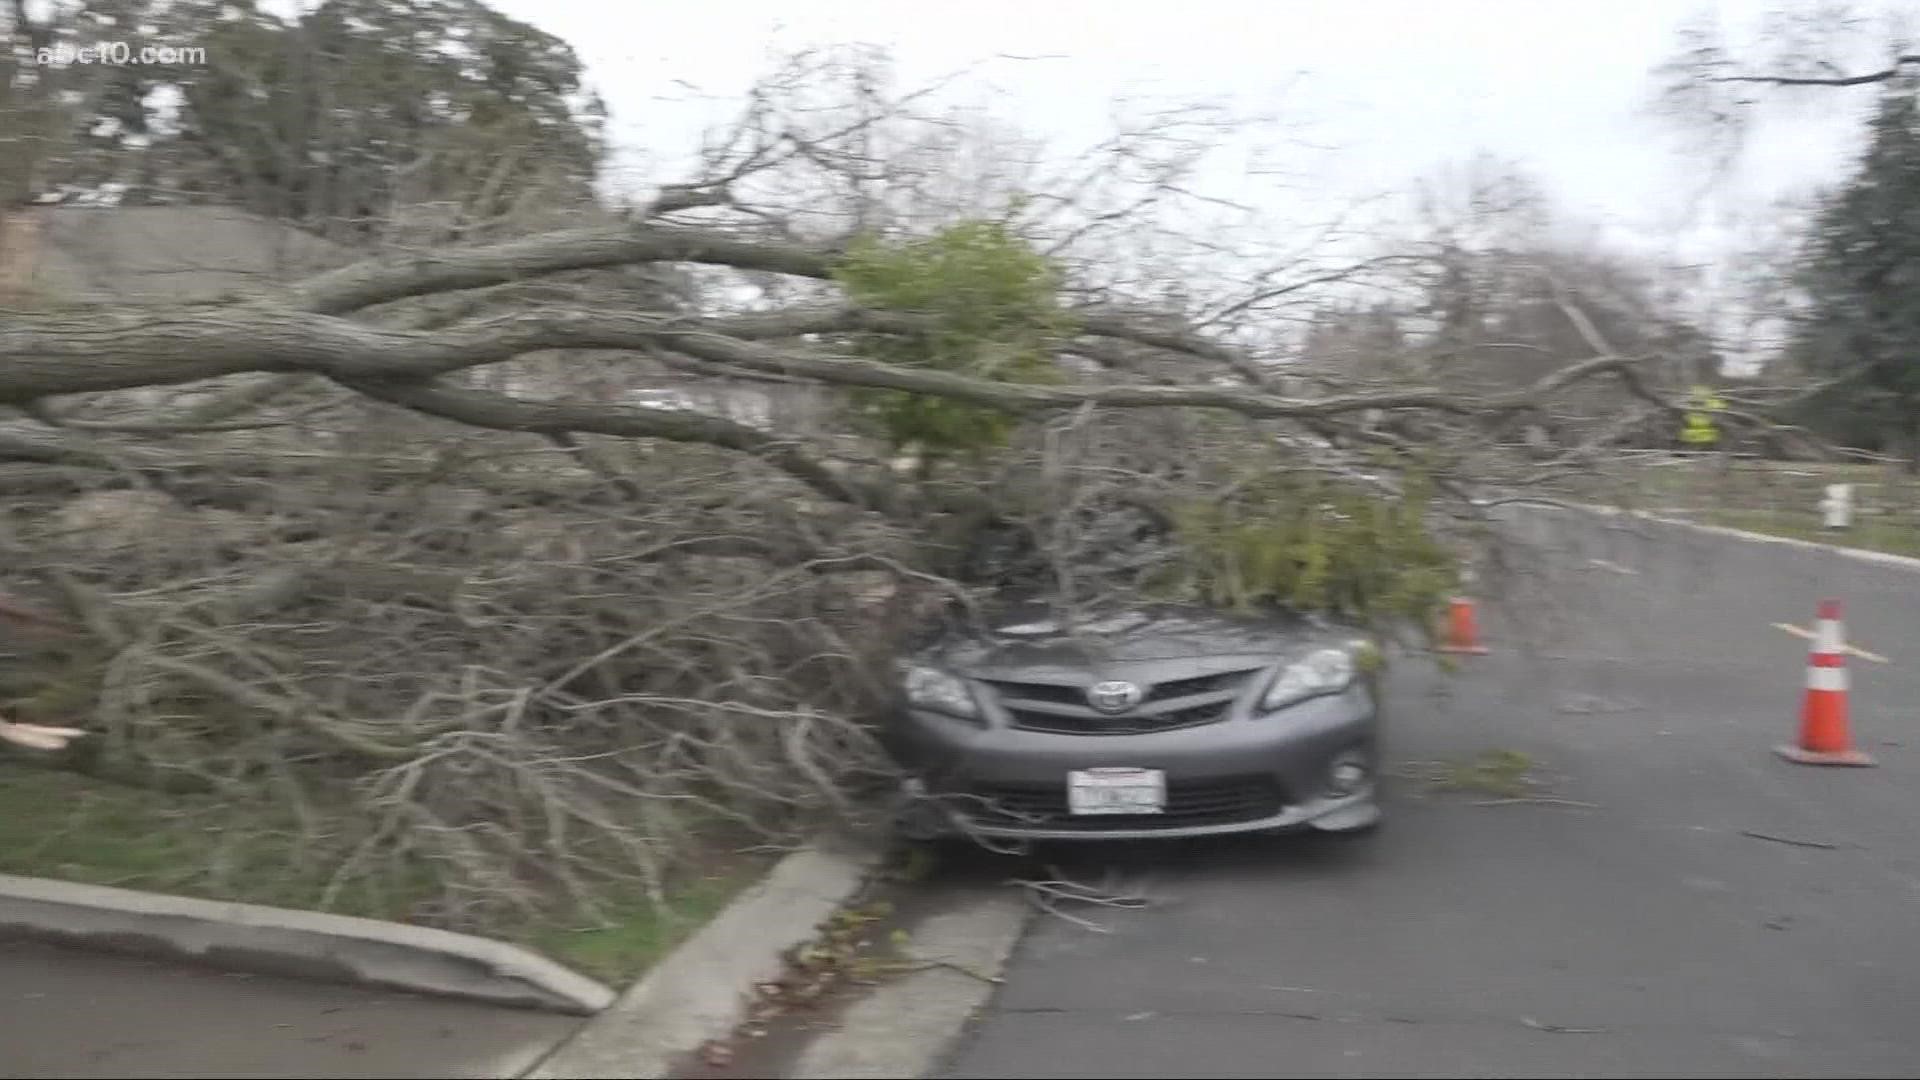 With the storm on the way, Sacramento homeowners are preparing for the gusty conditions to start turning up.